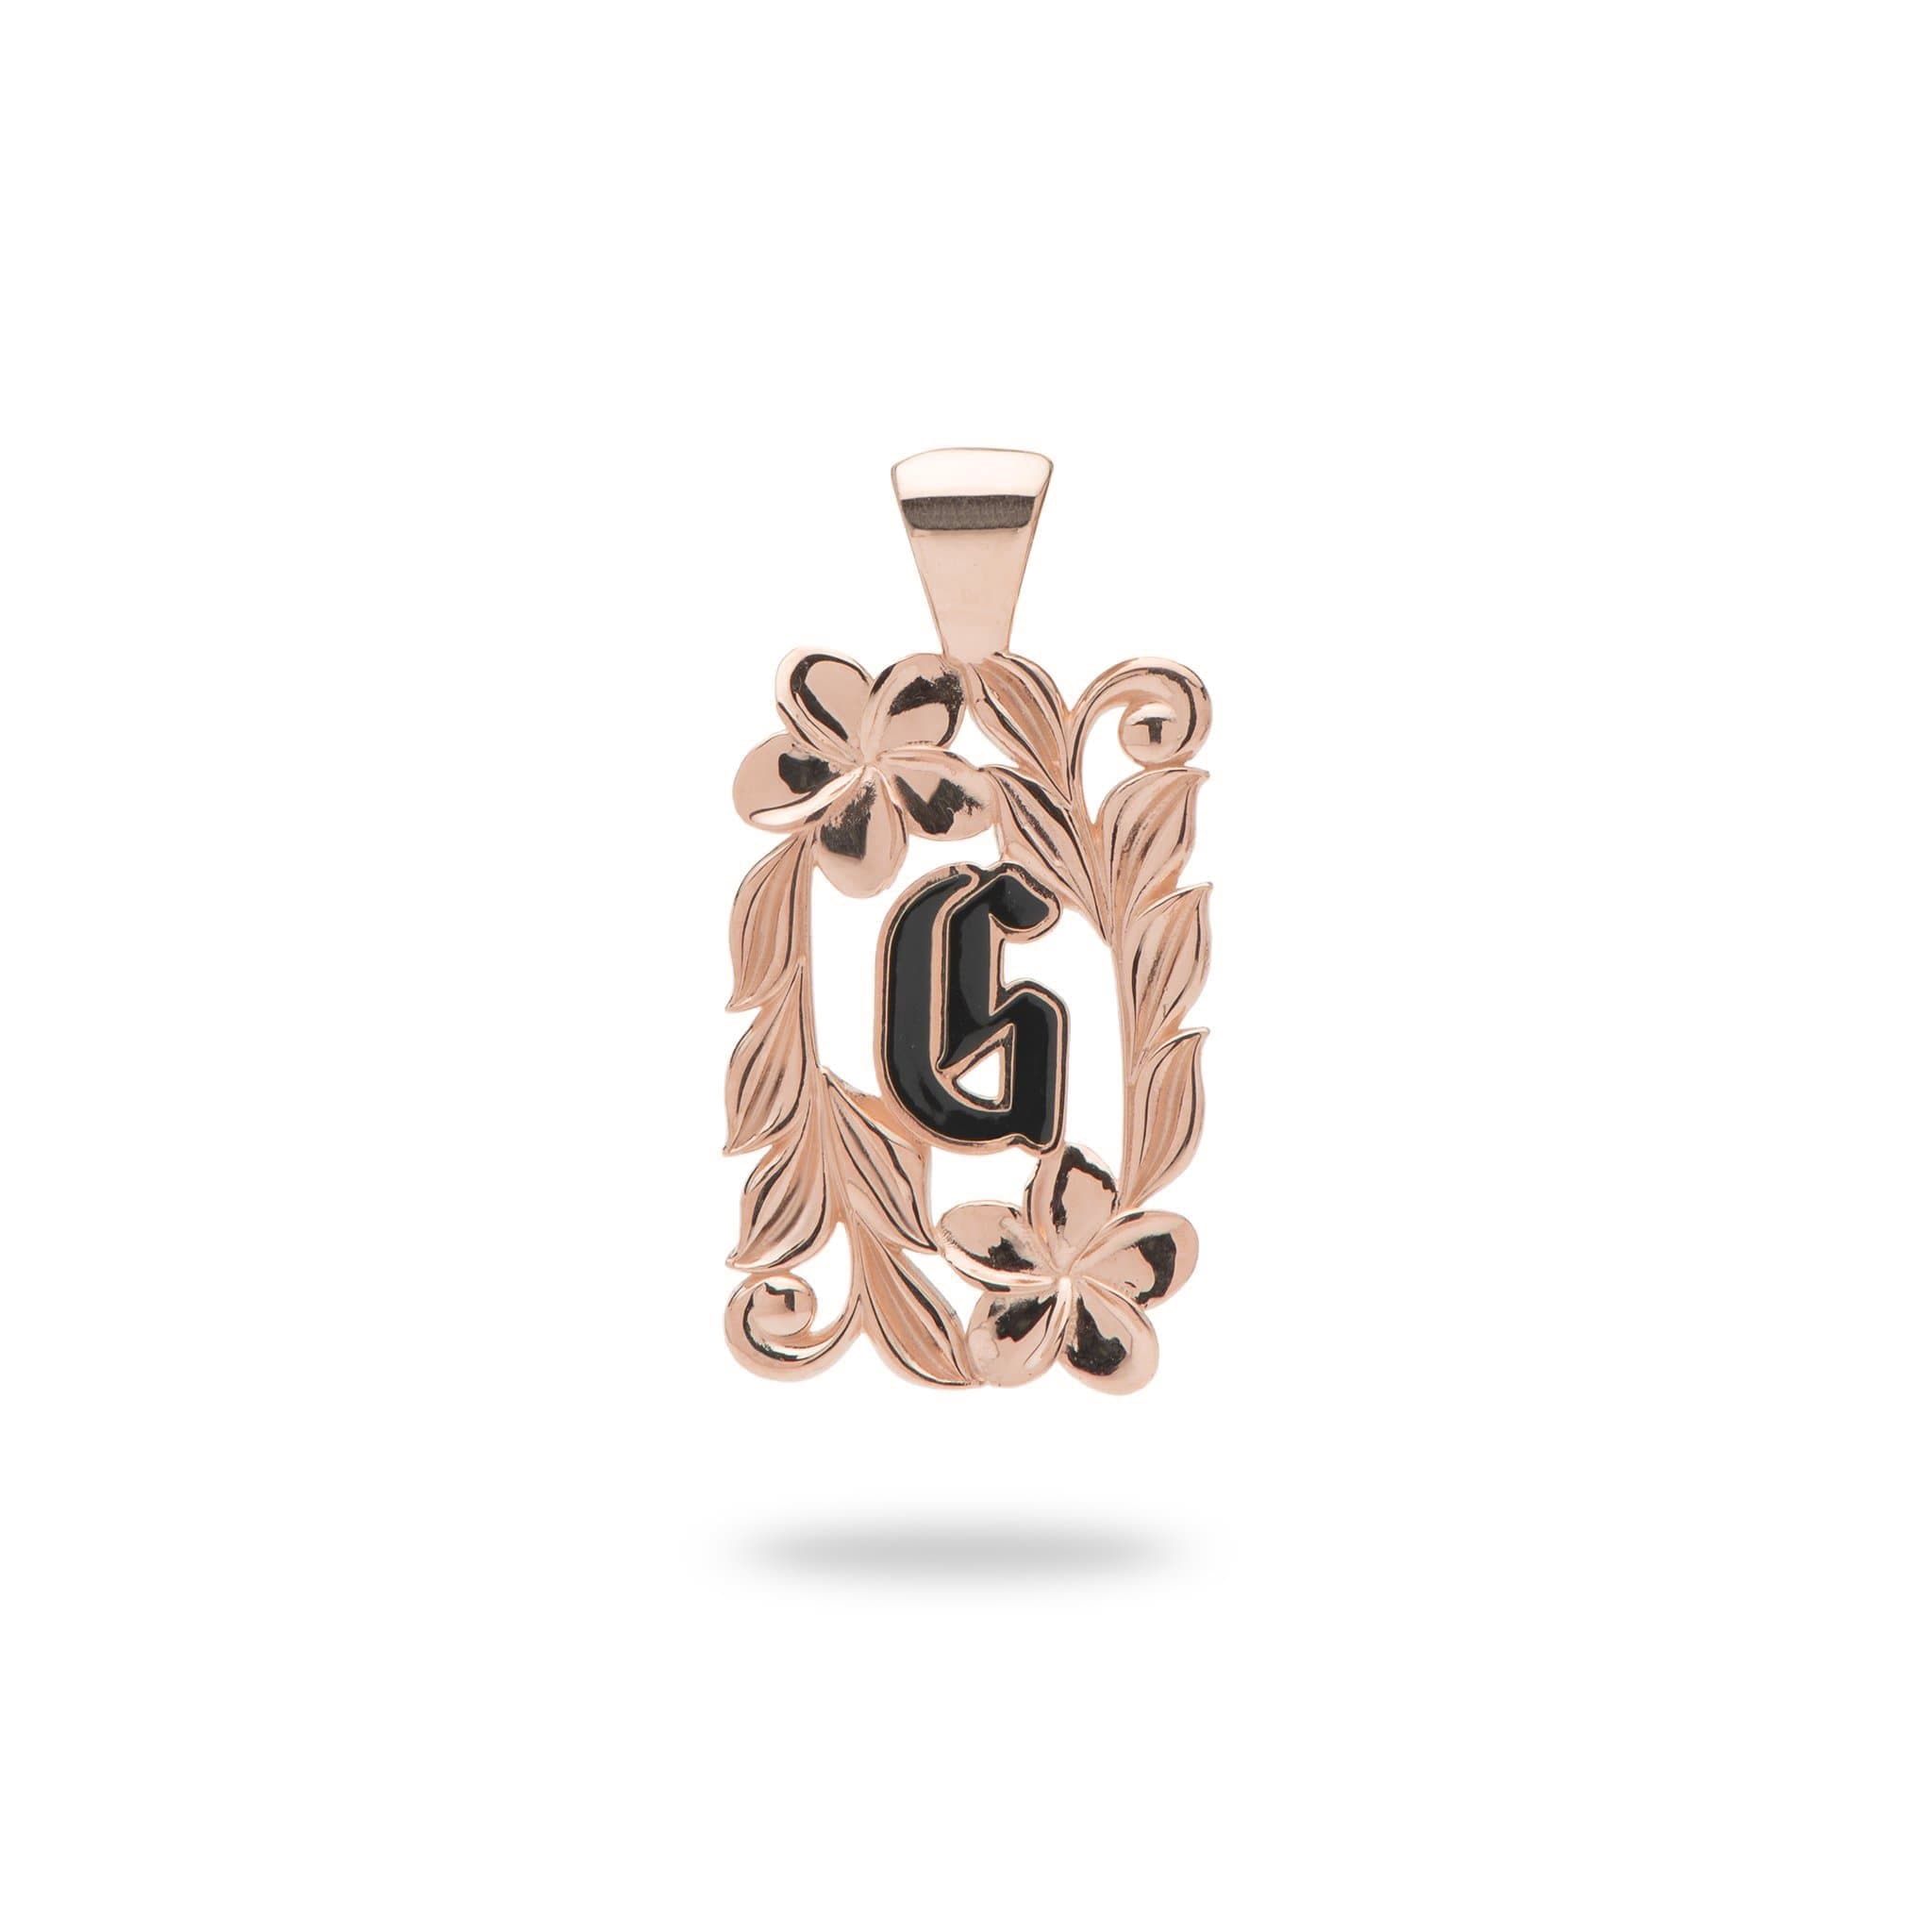 Special Order Hawaiian Heirloom Initial Pendant in Rose Gold - 014-03615-G-14R